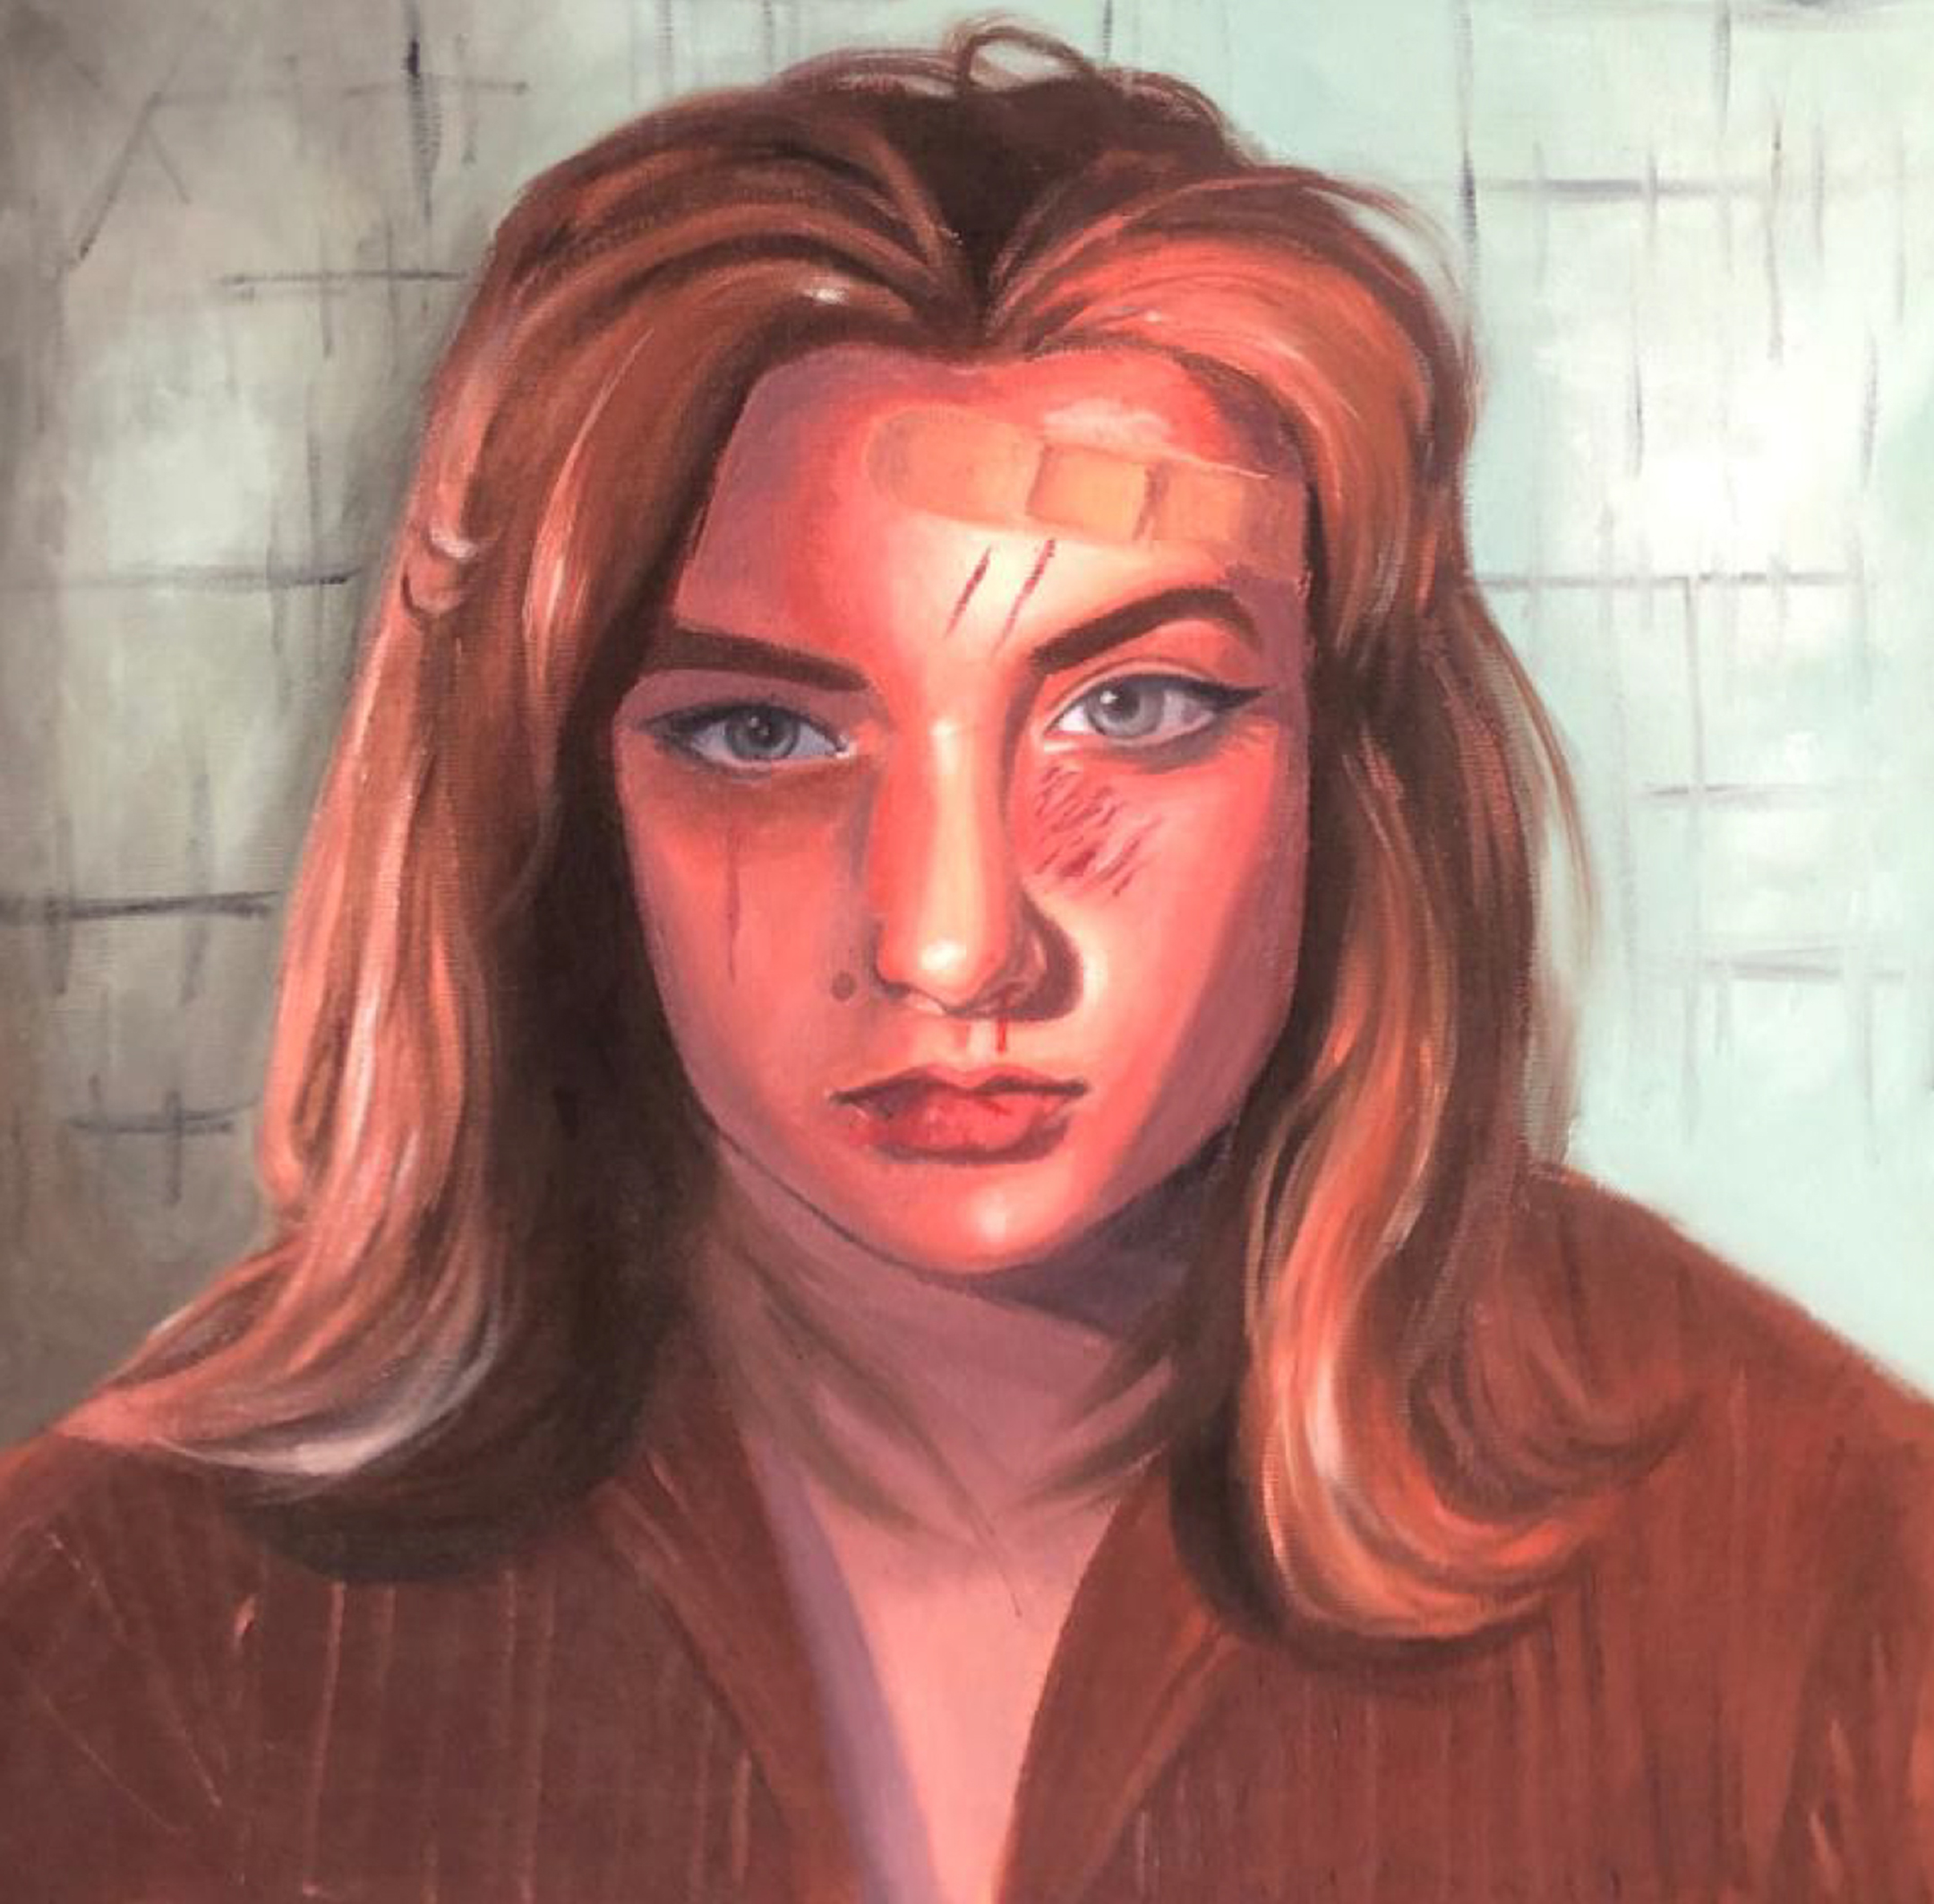 Painted portrait of a young woman with a bruised face